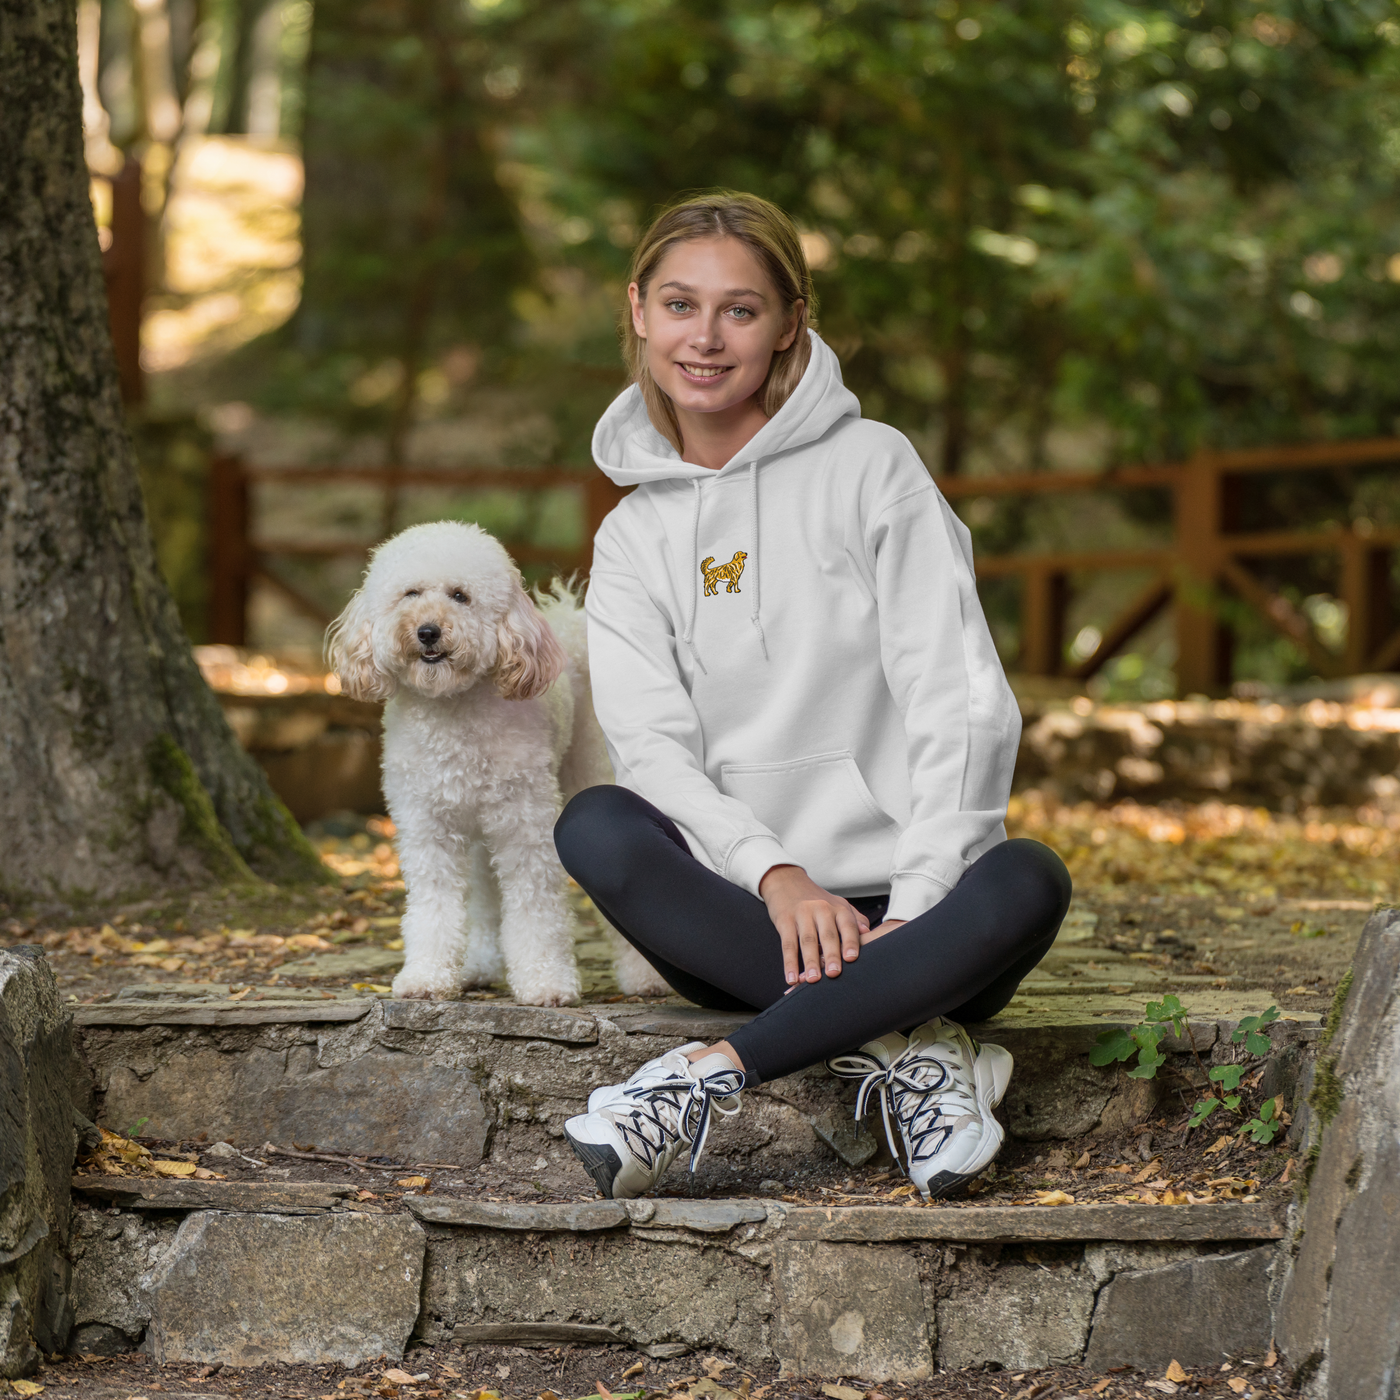 Bobby's Planet Women's Embroidered Golden Retriever Hoodie from Paws Dog Cat Animals Collection in White Color#color_white